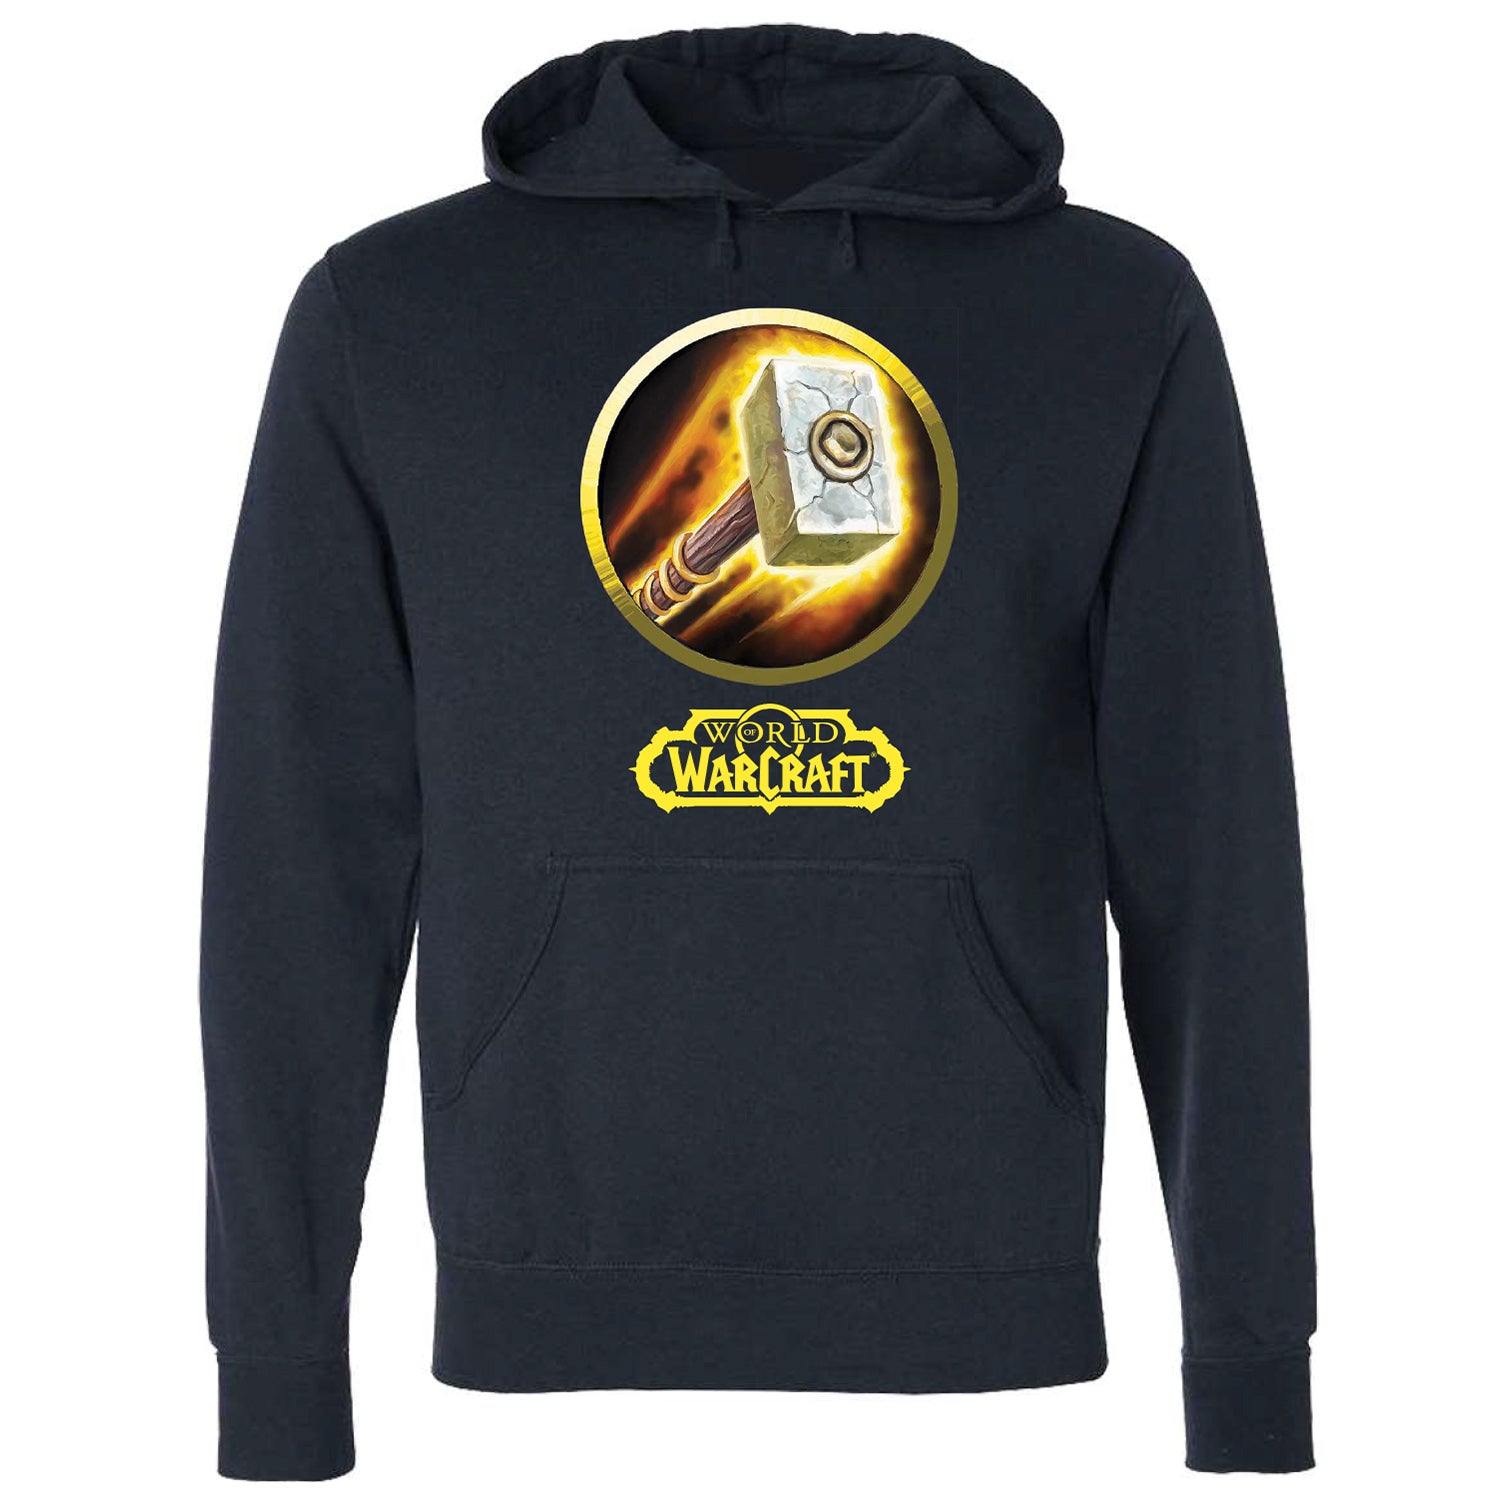 World of Warcraft Paladin Hoodie - Front View Navy Version